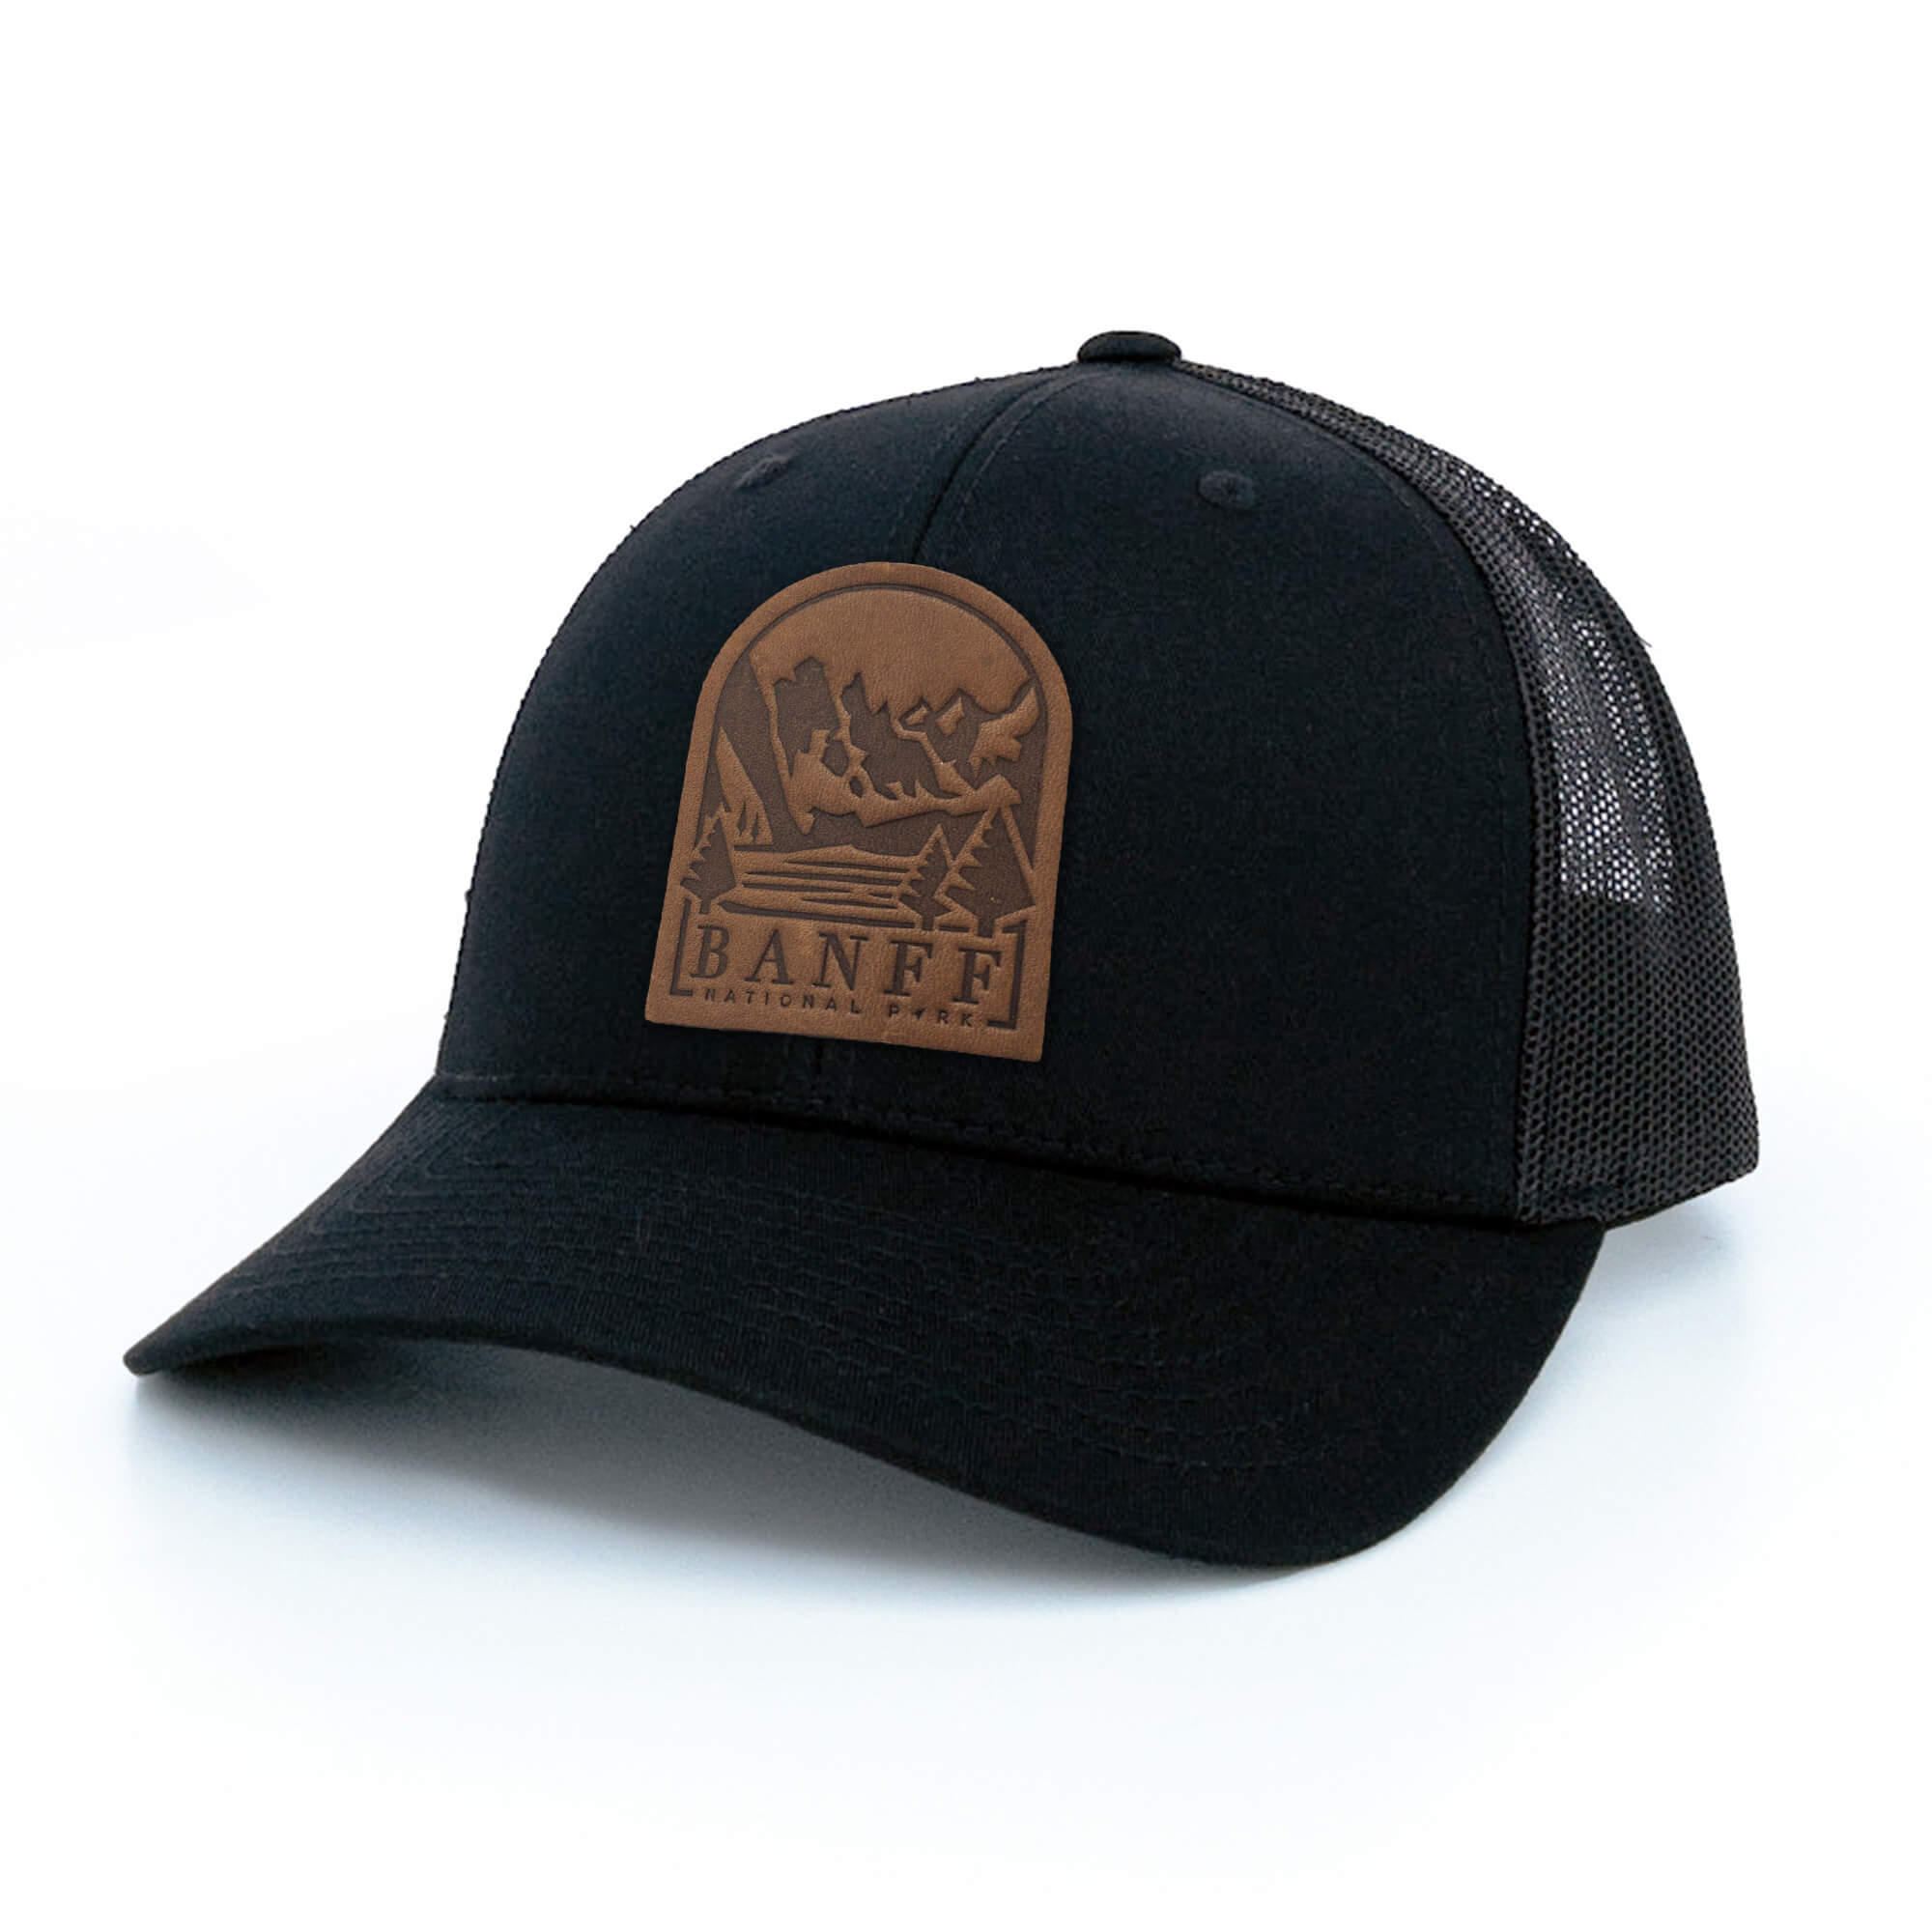 Black trucker hat with full-grain leather patch of Banff National Park | BLACK-007-001, CHARC-007-001, NAVY-007-001, HGREY-007-001, MOSS-007-001, BROWN-007-001